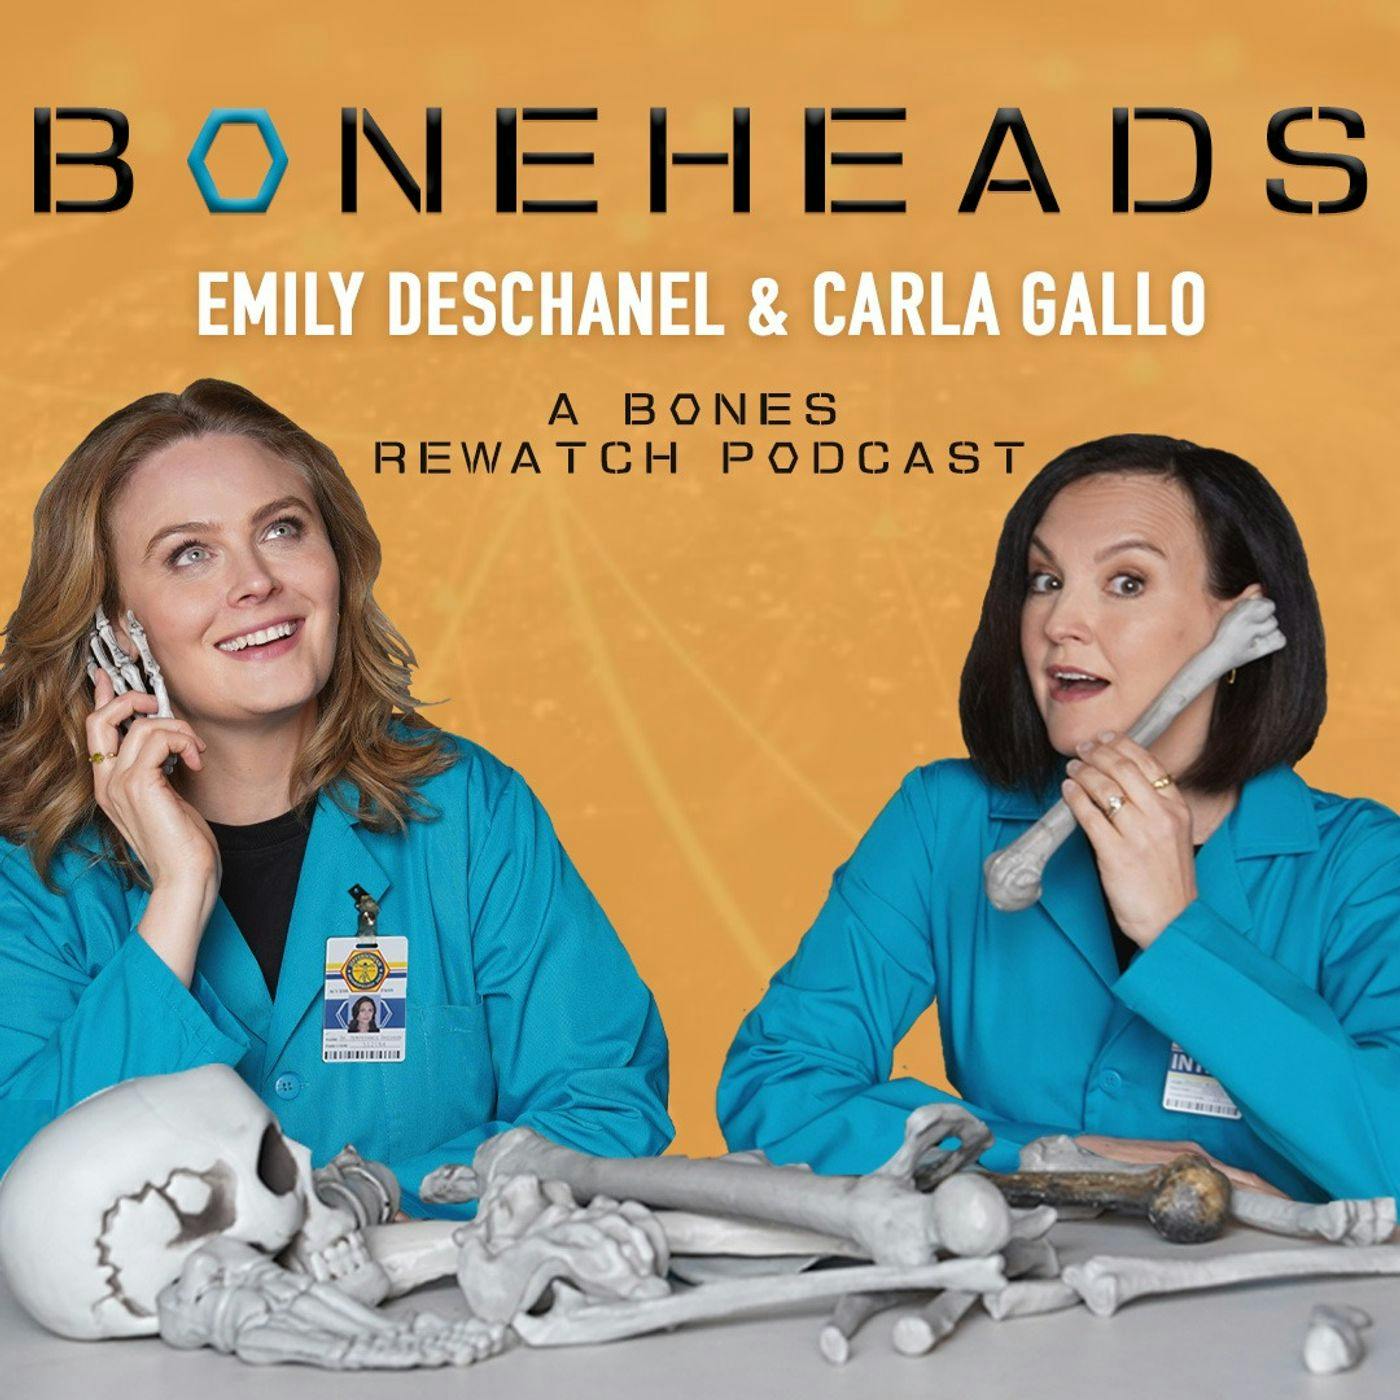 Boneheads with Emily Deschanel and Carla Gallo podcast show image